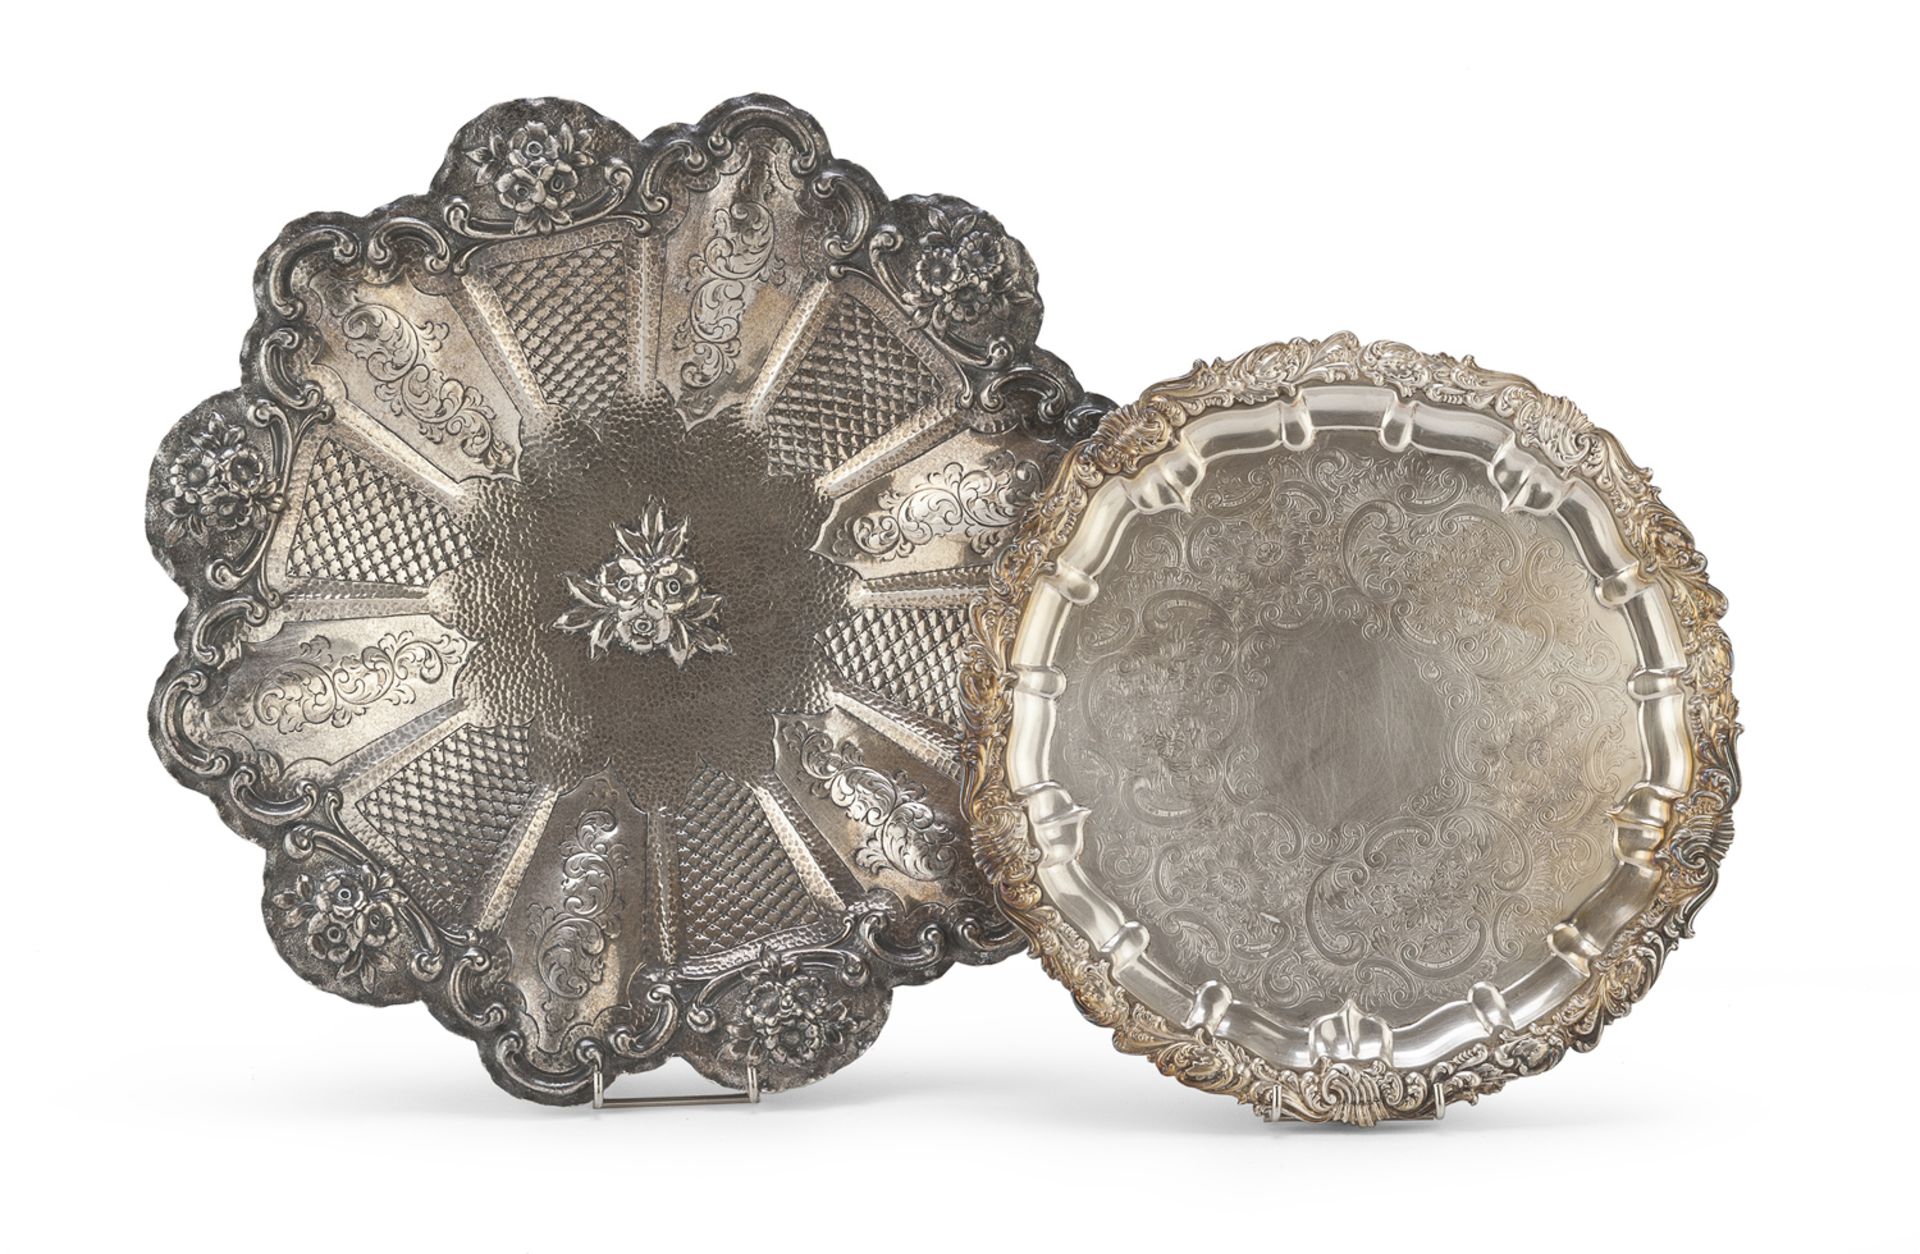 SILVER-PLATED FRUIT BOWL AND SALVER UNITED KINGDOM LATE 19th CENTURY